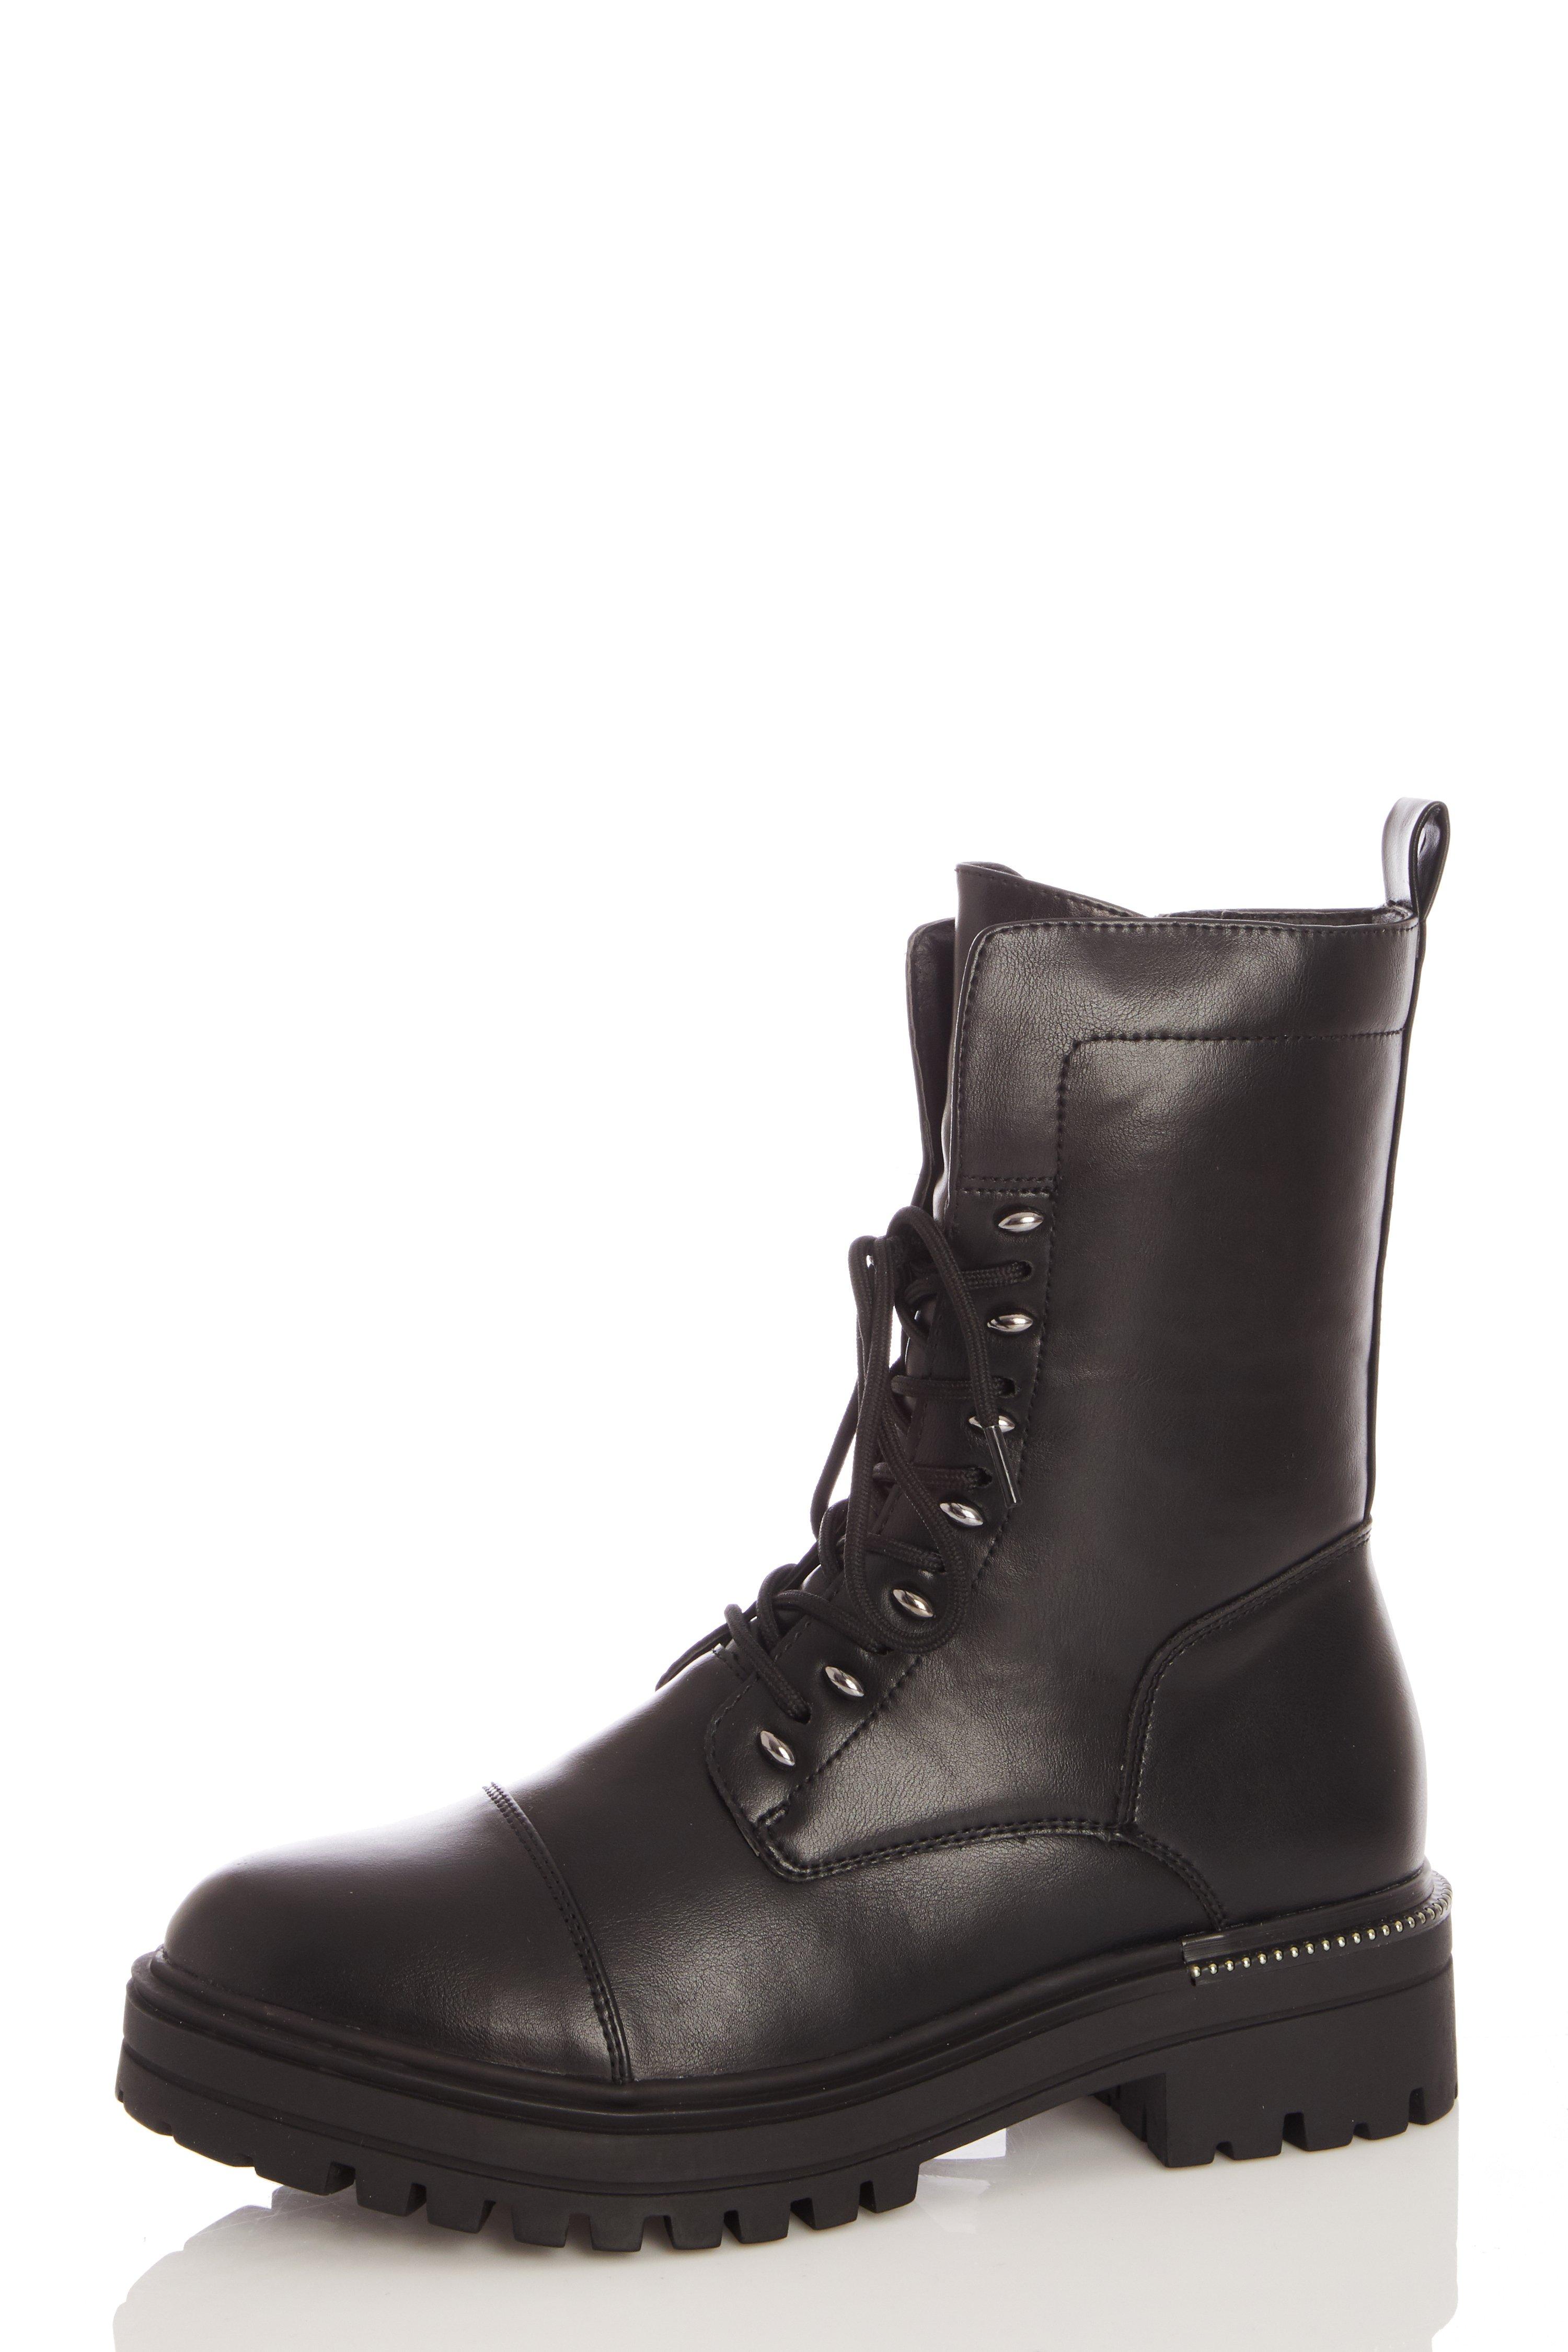 Black Lace Up Military Boot - Quiz Clothing